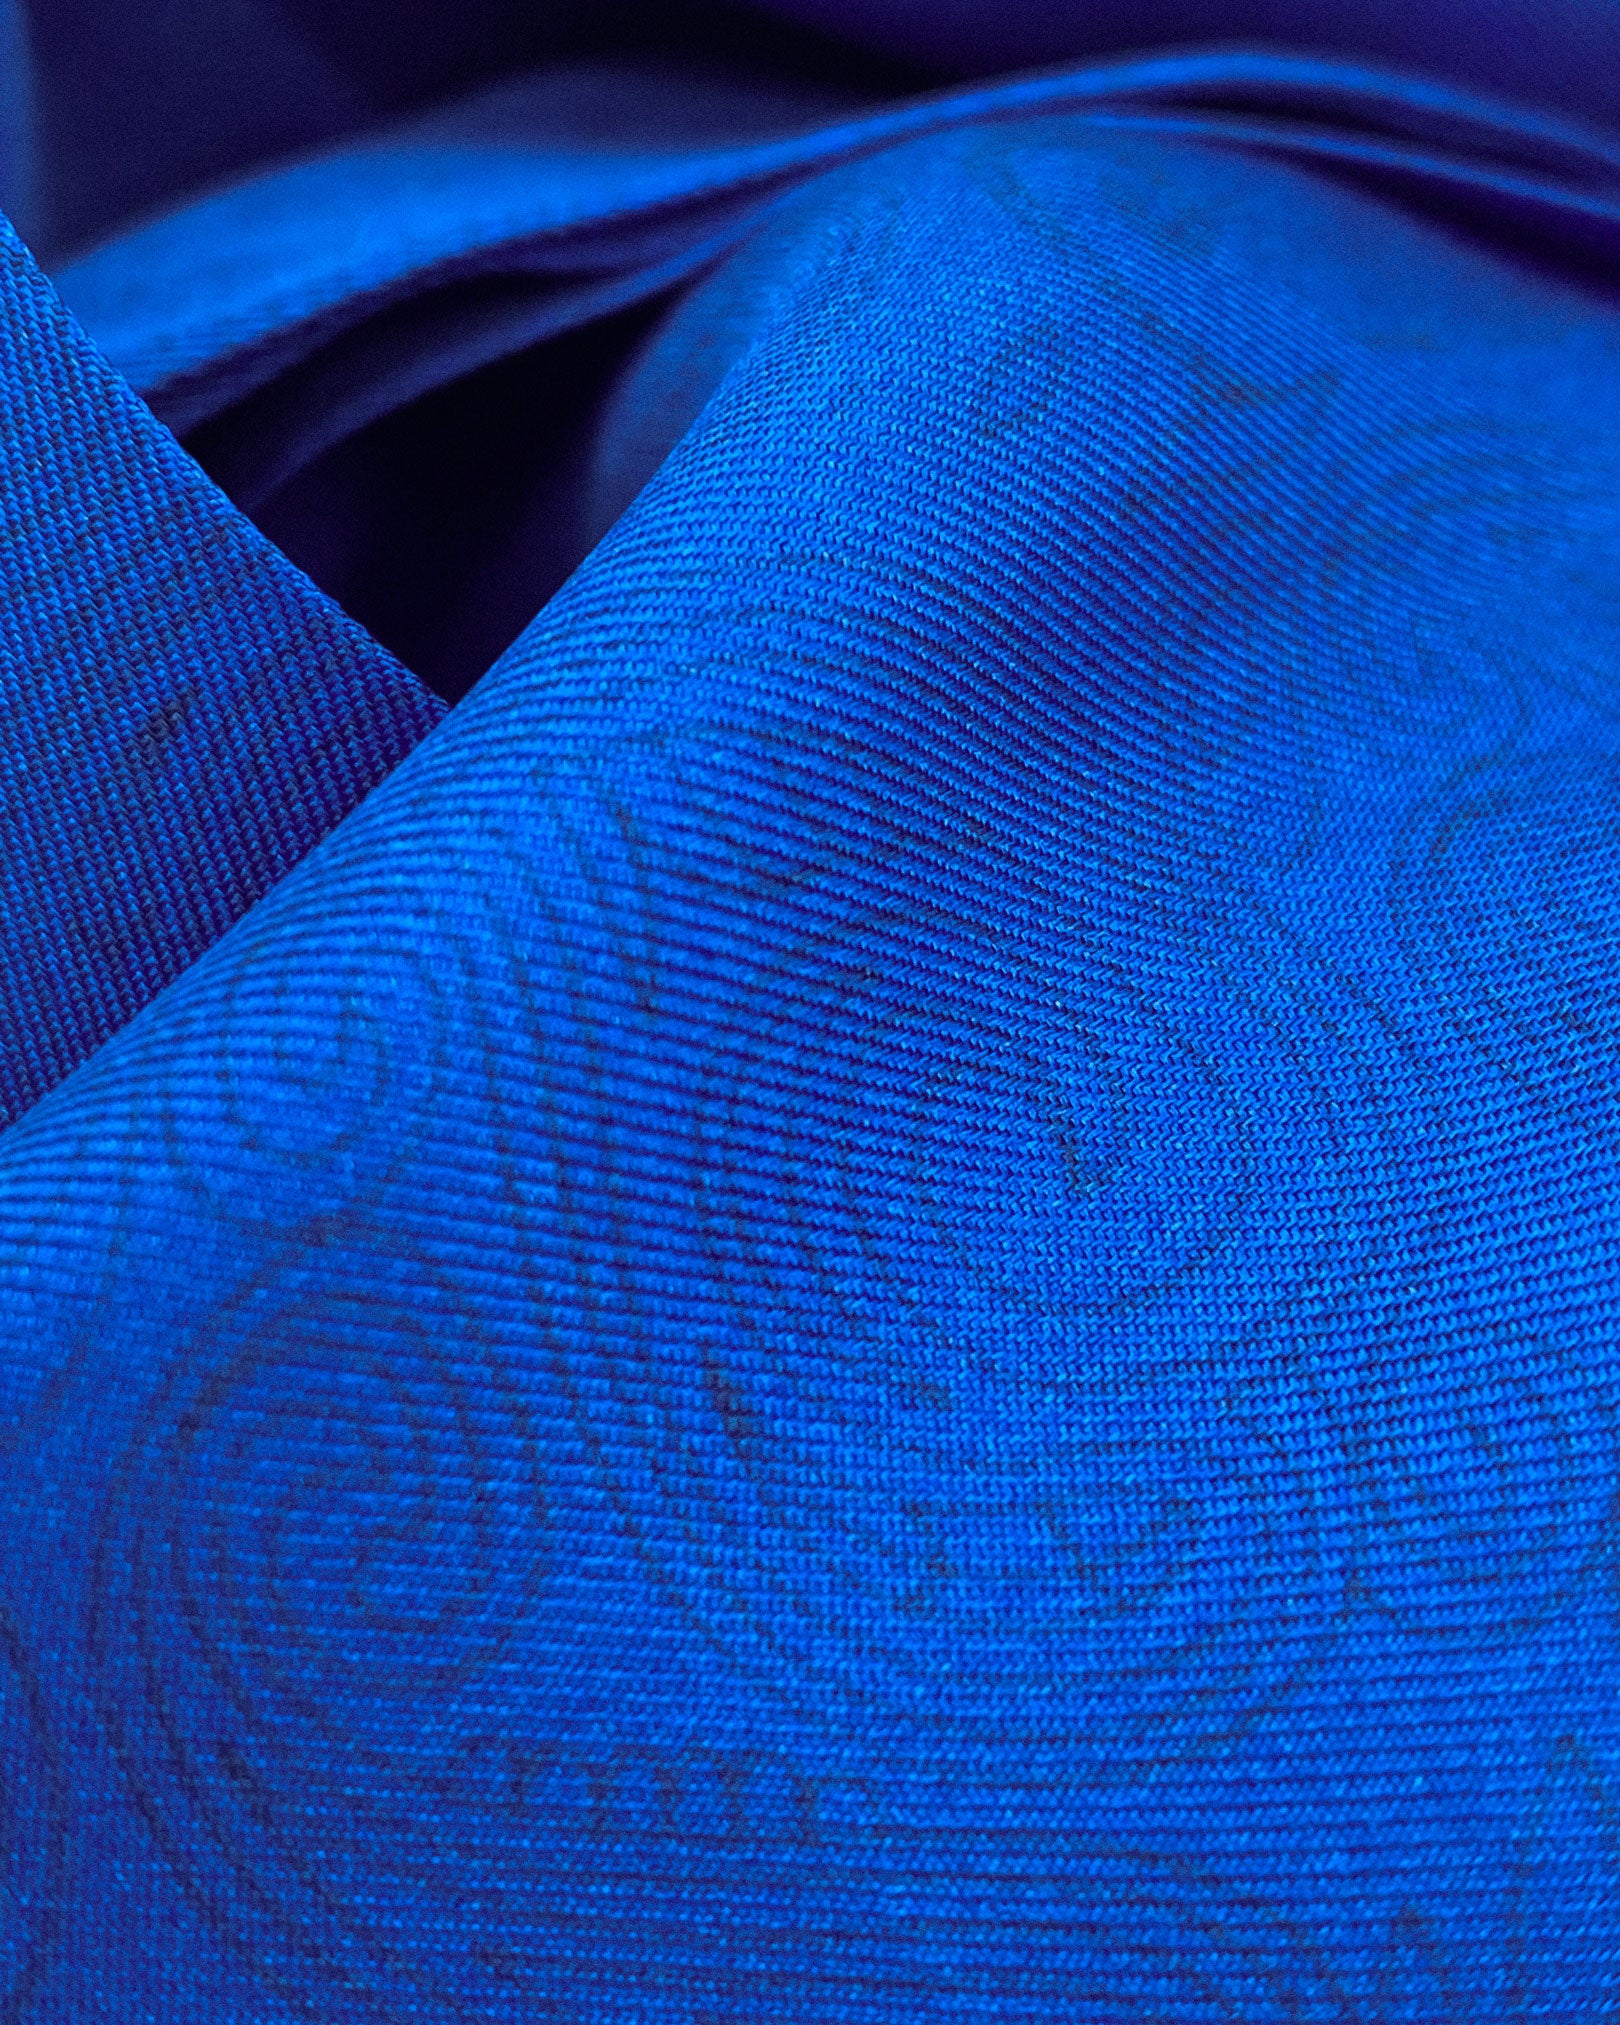 Ruffled close-up view of the 'Adachi ' silk aviator scarf, presenting a closer view of the powder-blue paisley swirls and subtle lustre of the silk material.